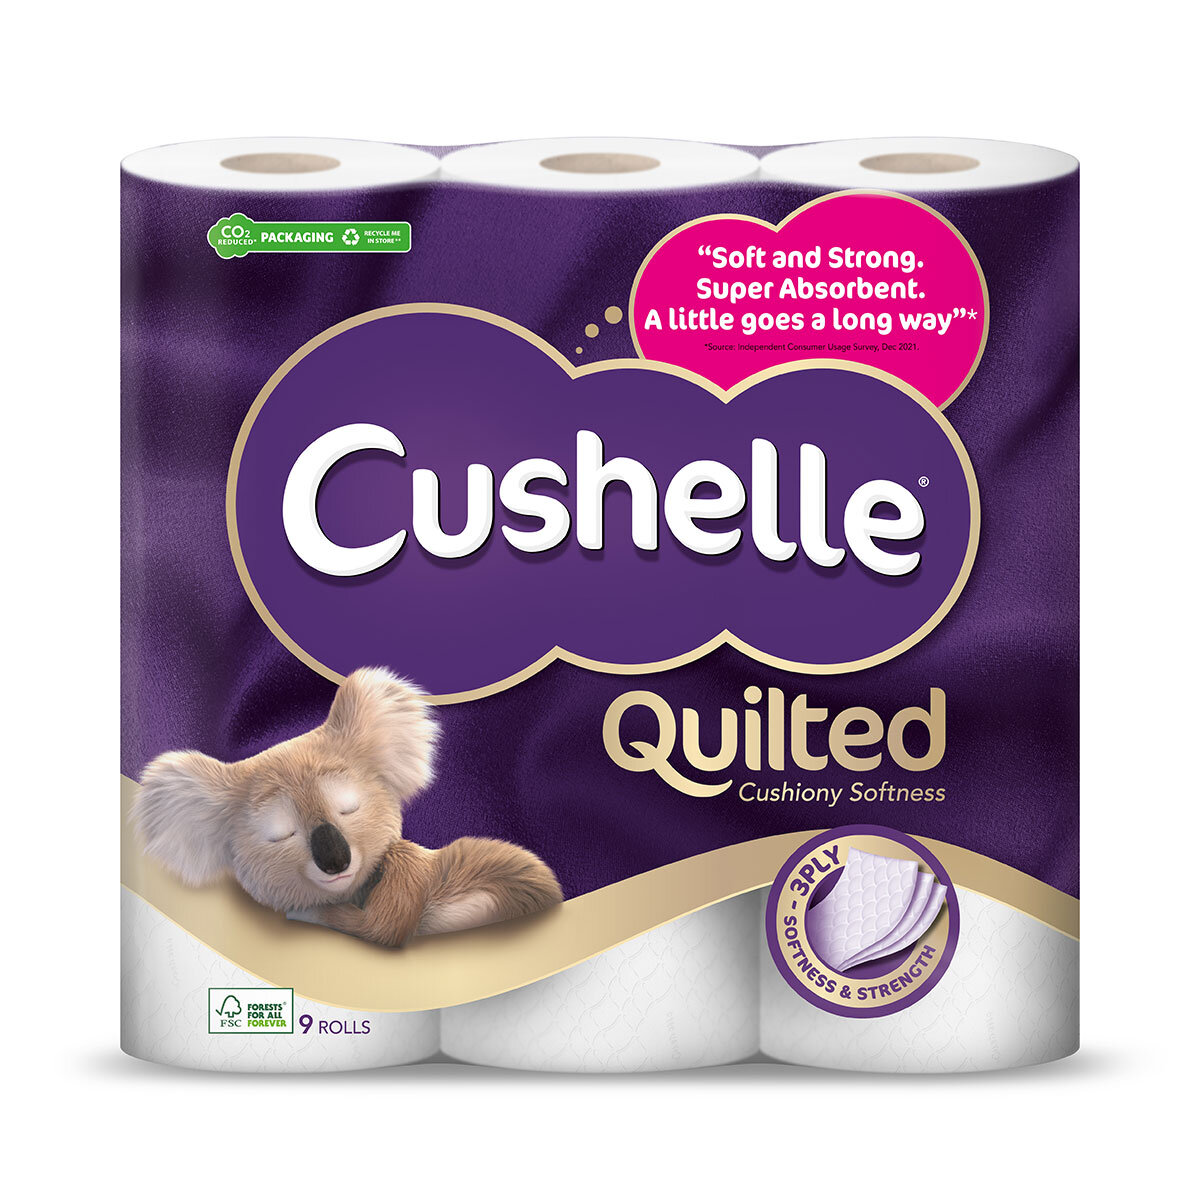 Cushelle Quilted 3-Ply Toilet Tissue, 45 Rolls Pallet Deal (36 Units)